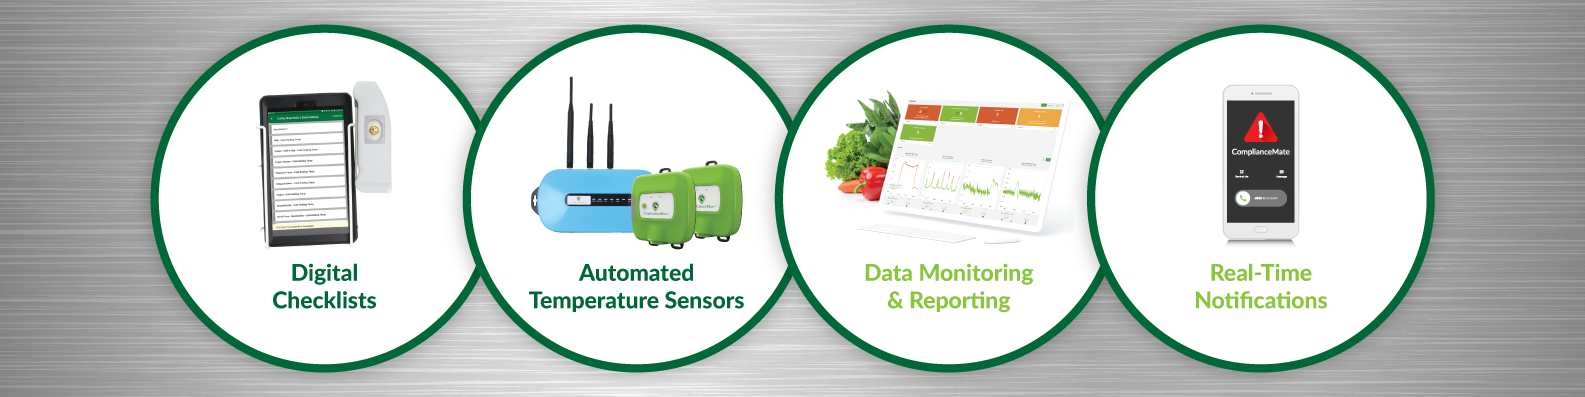 IoT Temperature Monitoring in Food Service Is Just the Beginning